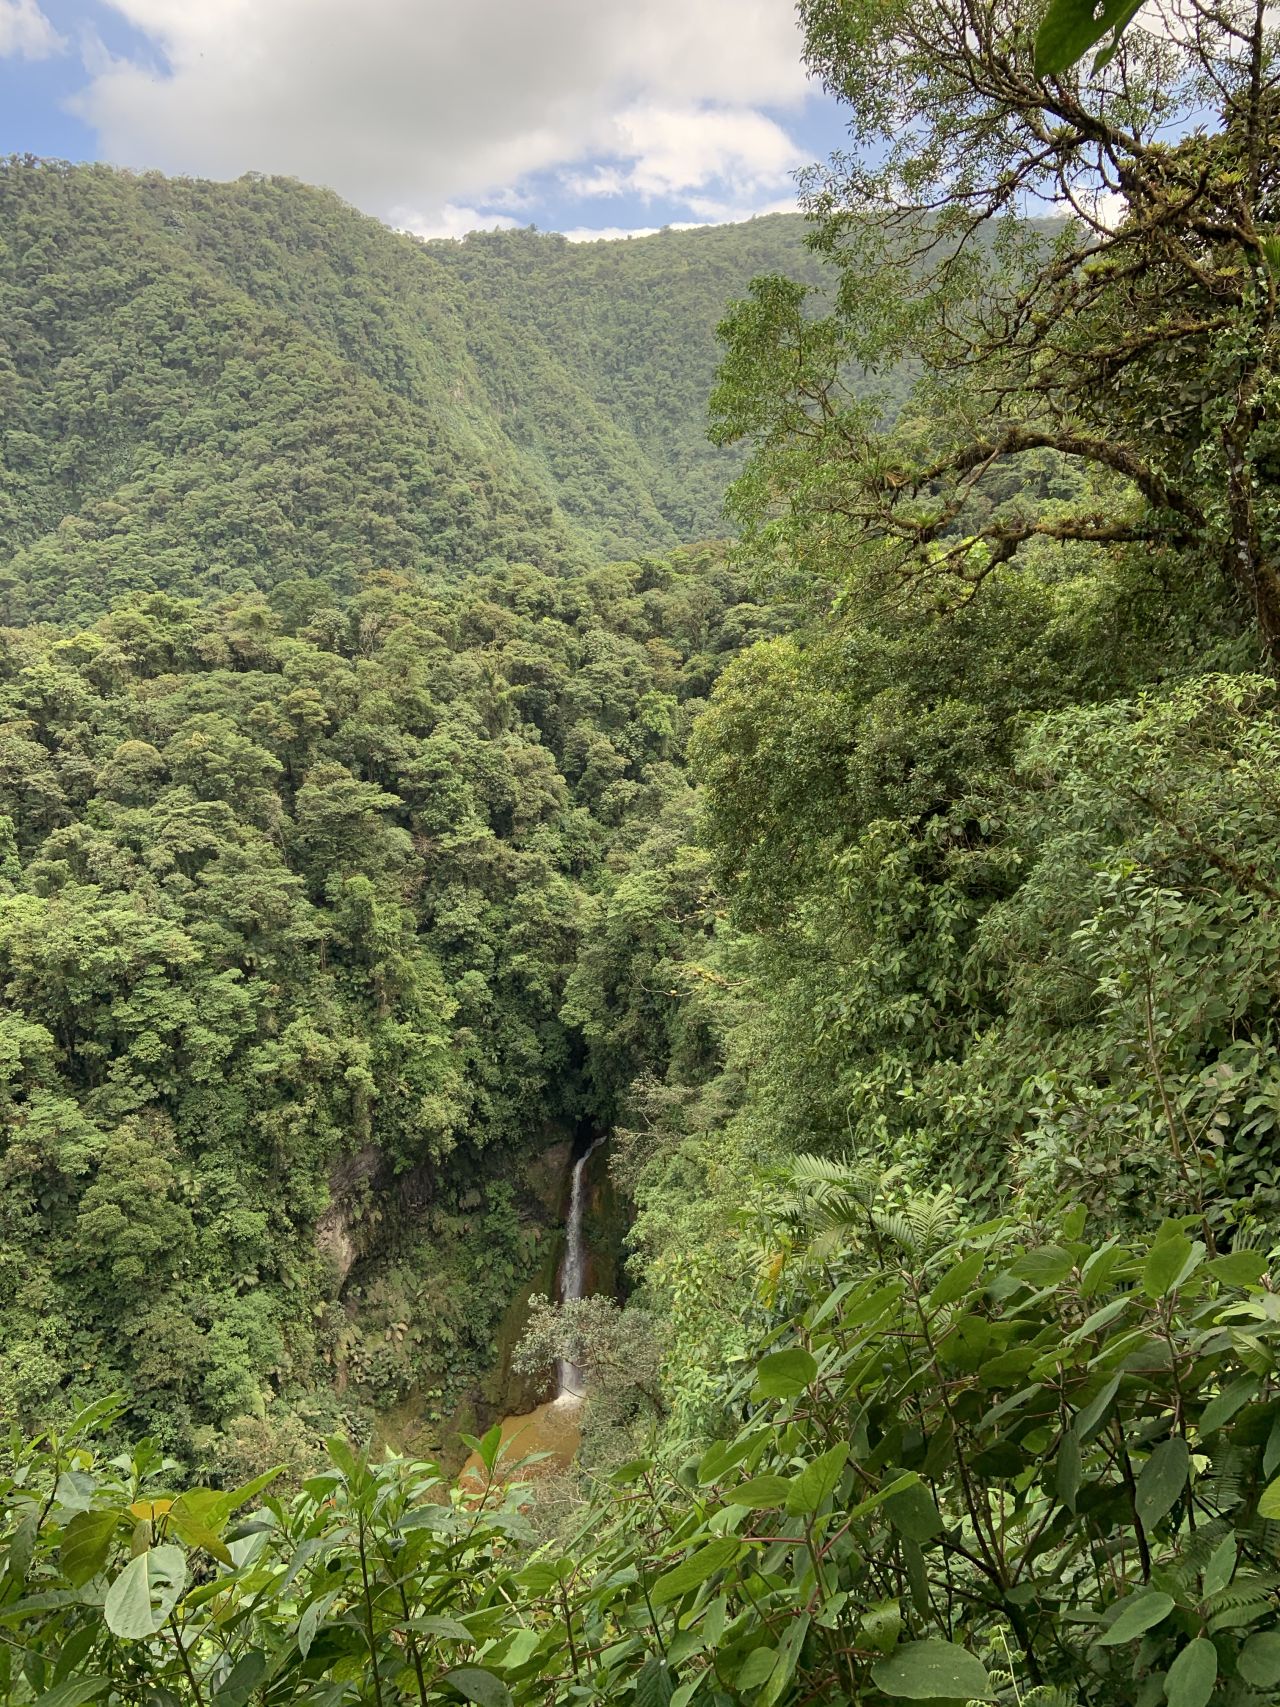 Across the rest of the tropics primary forest is being destroyed at a <a href="https://edition.cnn.com/2020/06/02/world/tropical-forest-six-seconds-scli-intl/index.html" target="_blank">terrifying rate</a>, but in Costa Rica, old, original forest makes up around <a href="http://www.fao.org/3/a-i1757e.pdf" target="_blank" target="_blank">a quarter</a> of its forested area. 